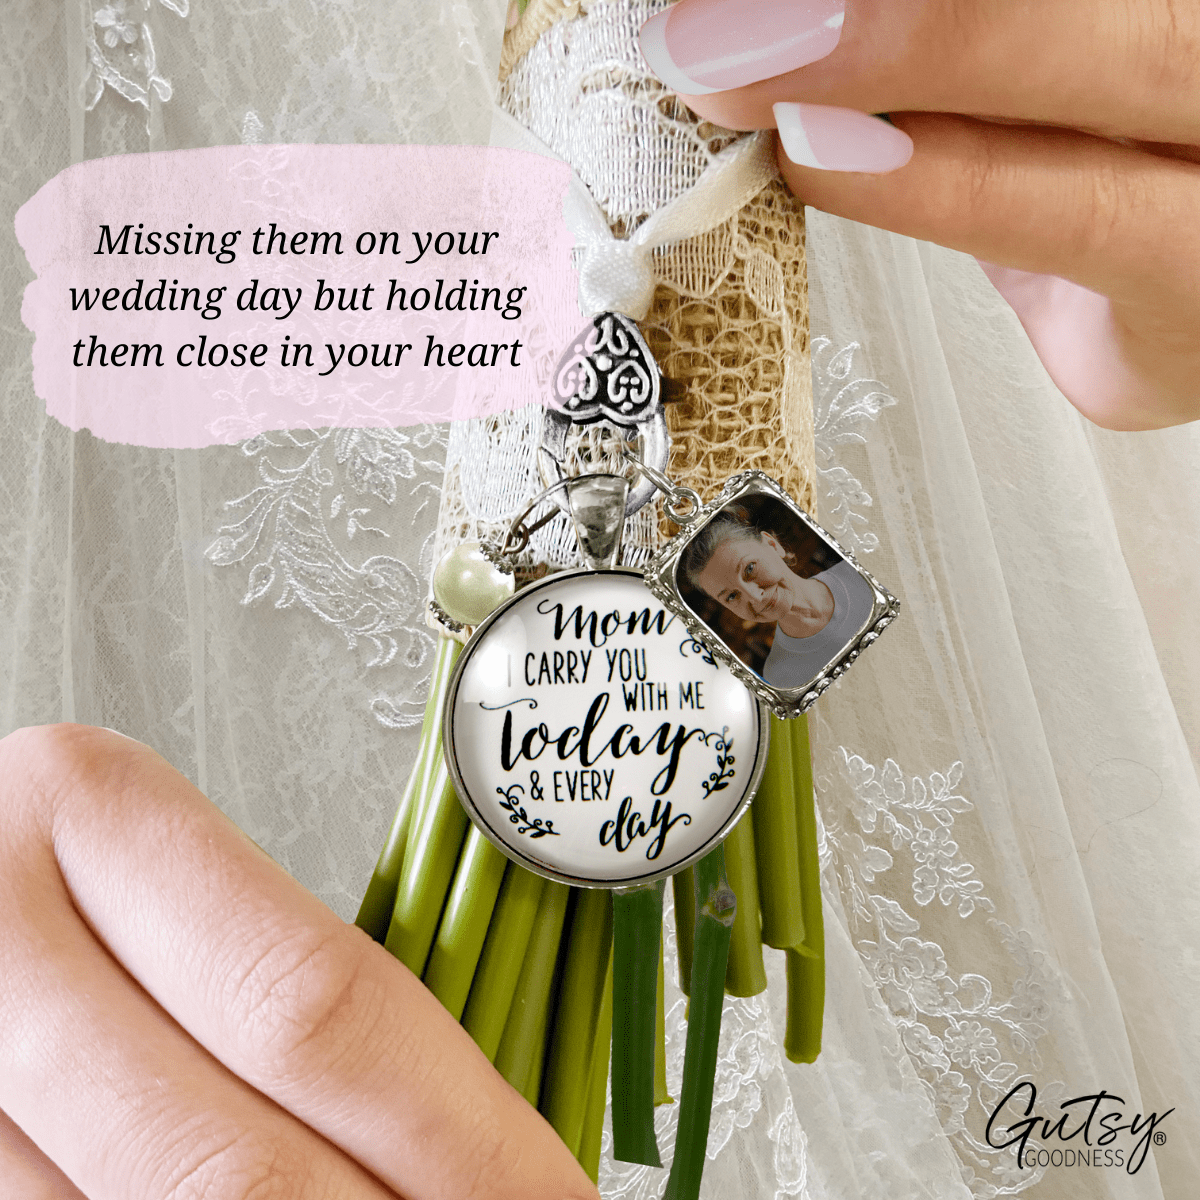 Bridal Bouquet Photo Charm Mom I Carry You Wedding White Silver Finish Memory Jewels - Gutsy Goodness Handmade Jewelry Gifts